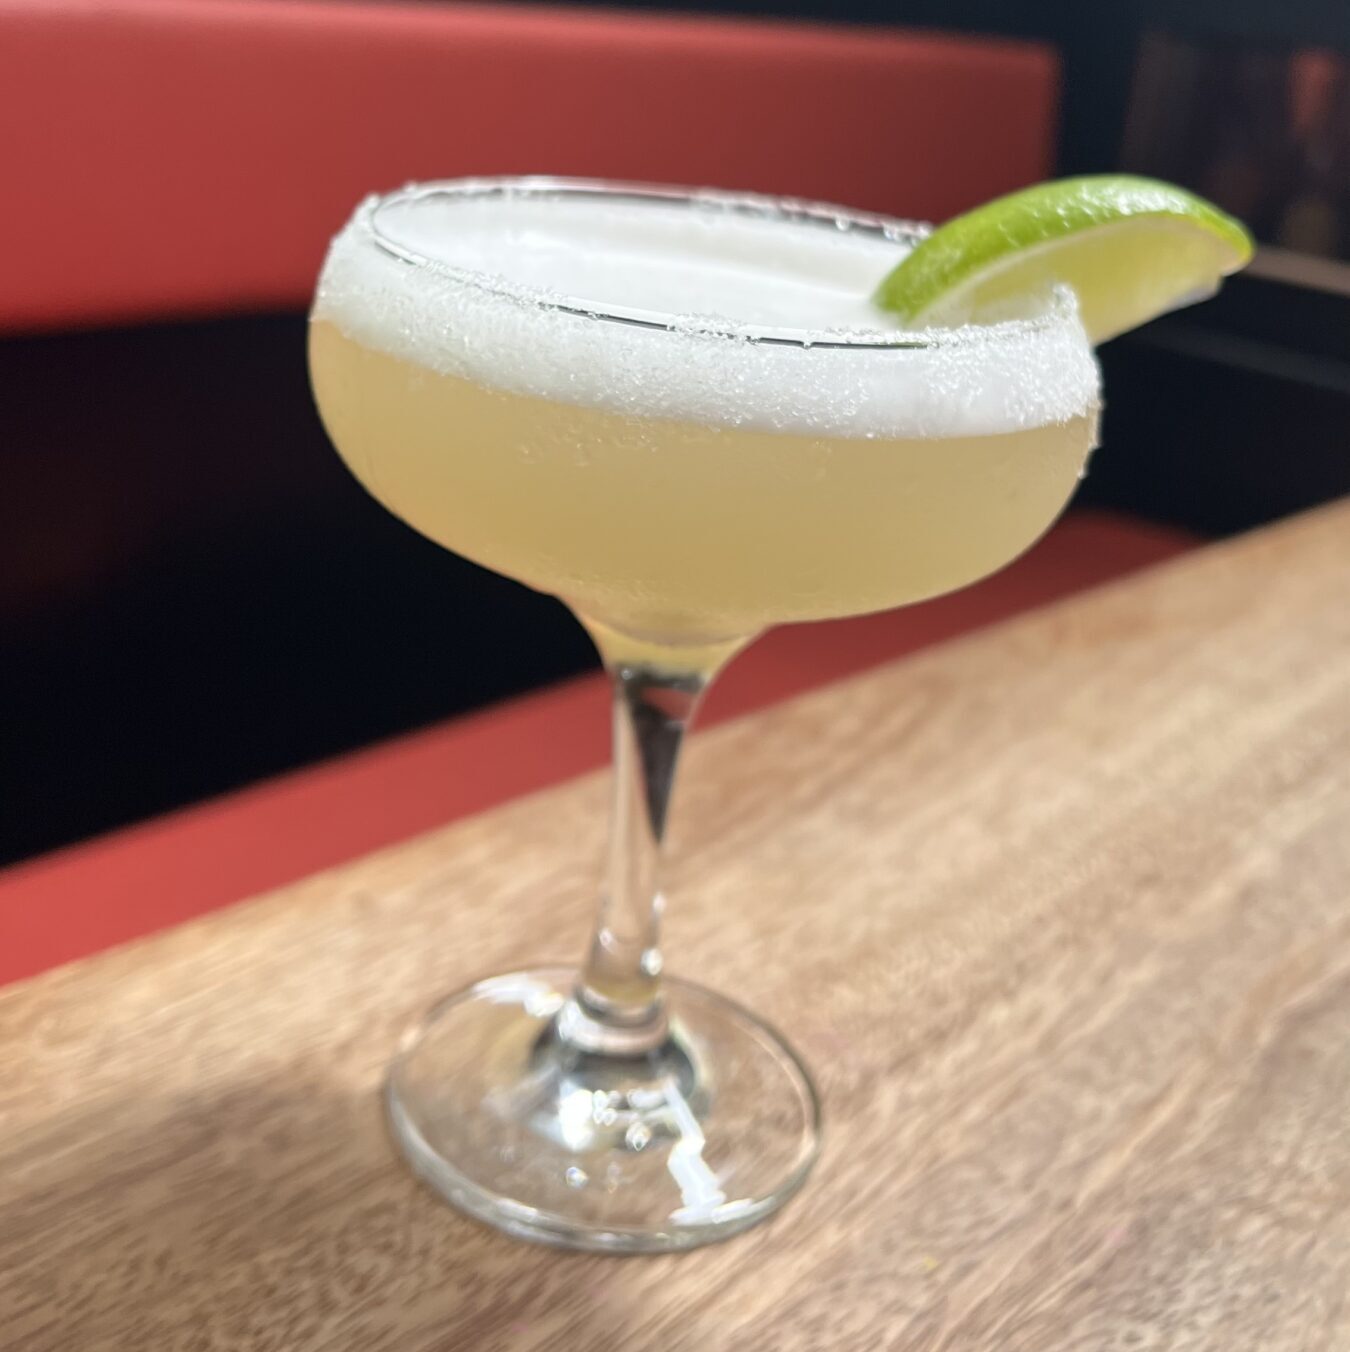 £1 off Margaritas for National Tequila Day